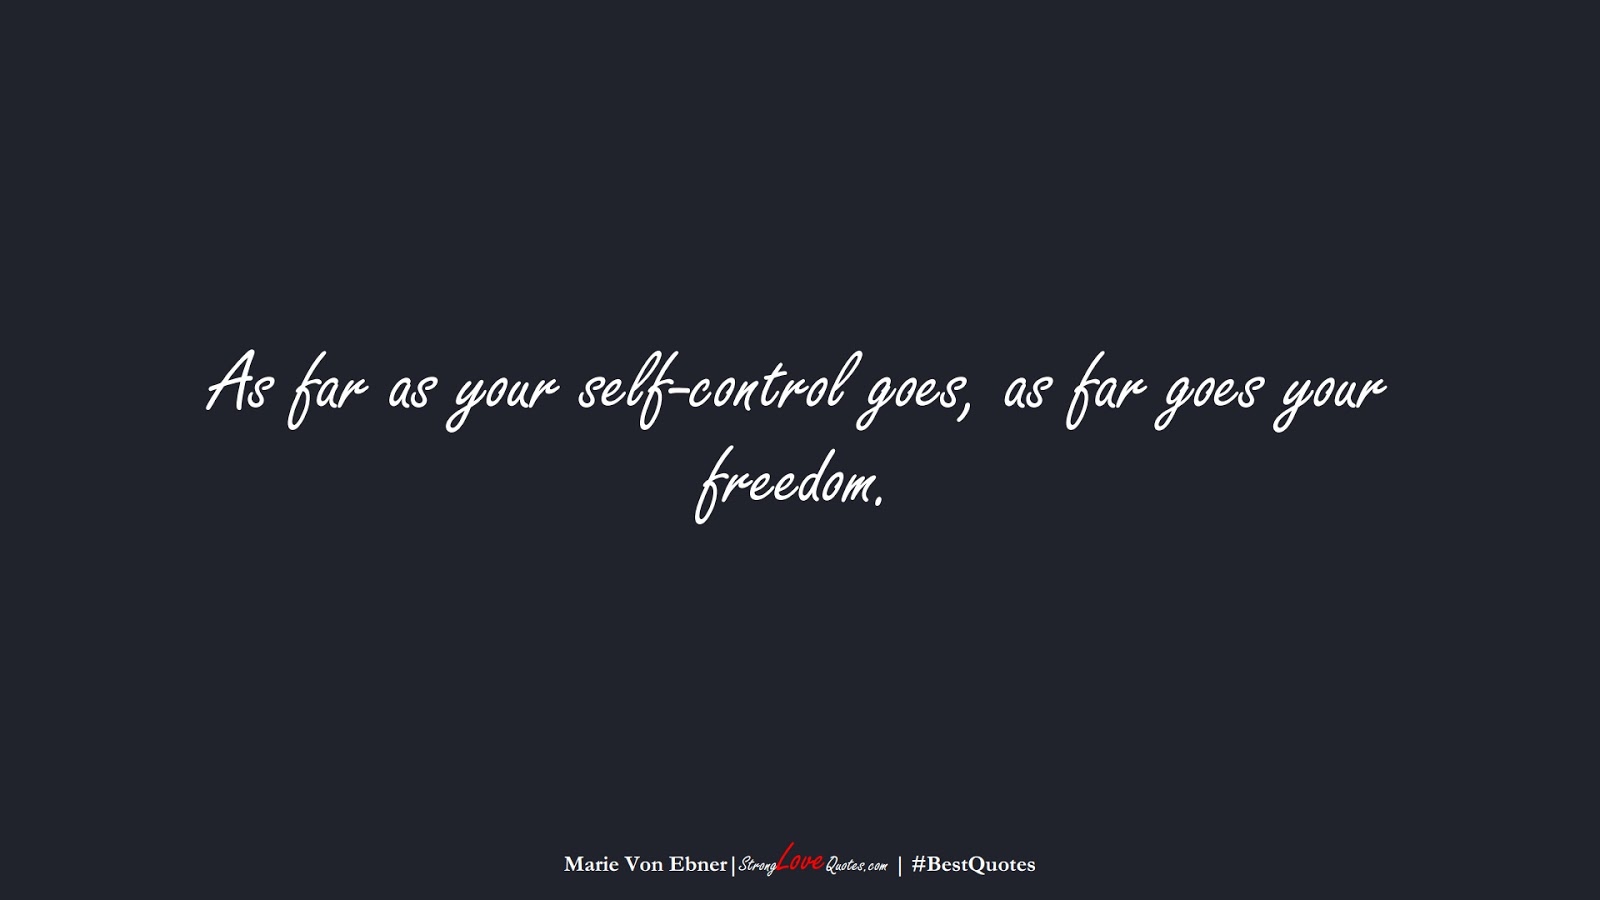 As far as your self-control goes, as far goes your freedom. (Marie Von Ebner);  #BestQuotes